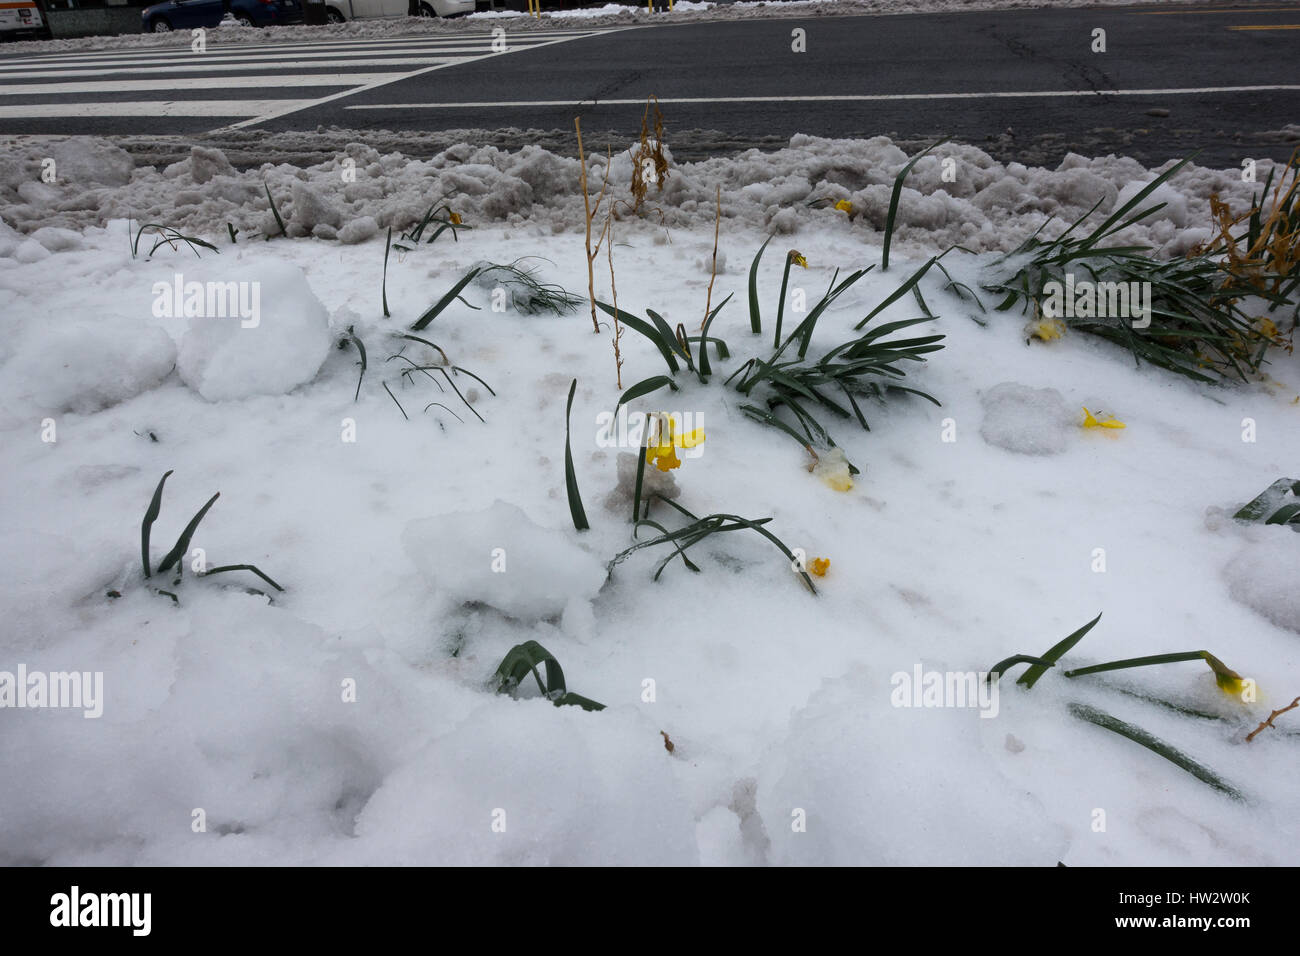 Yellow flowers, limp from freeze, stand in icy snow after late winter snowstorm in urban planter alongside highway.  Washington, DC Stock Photo